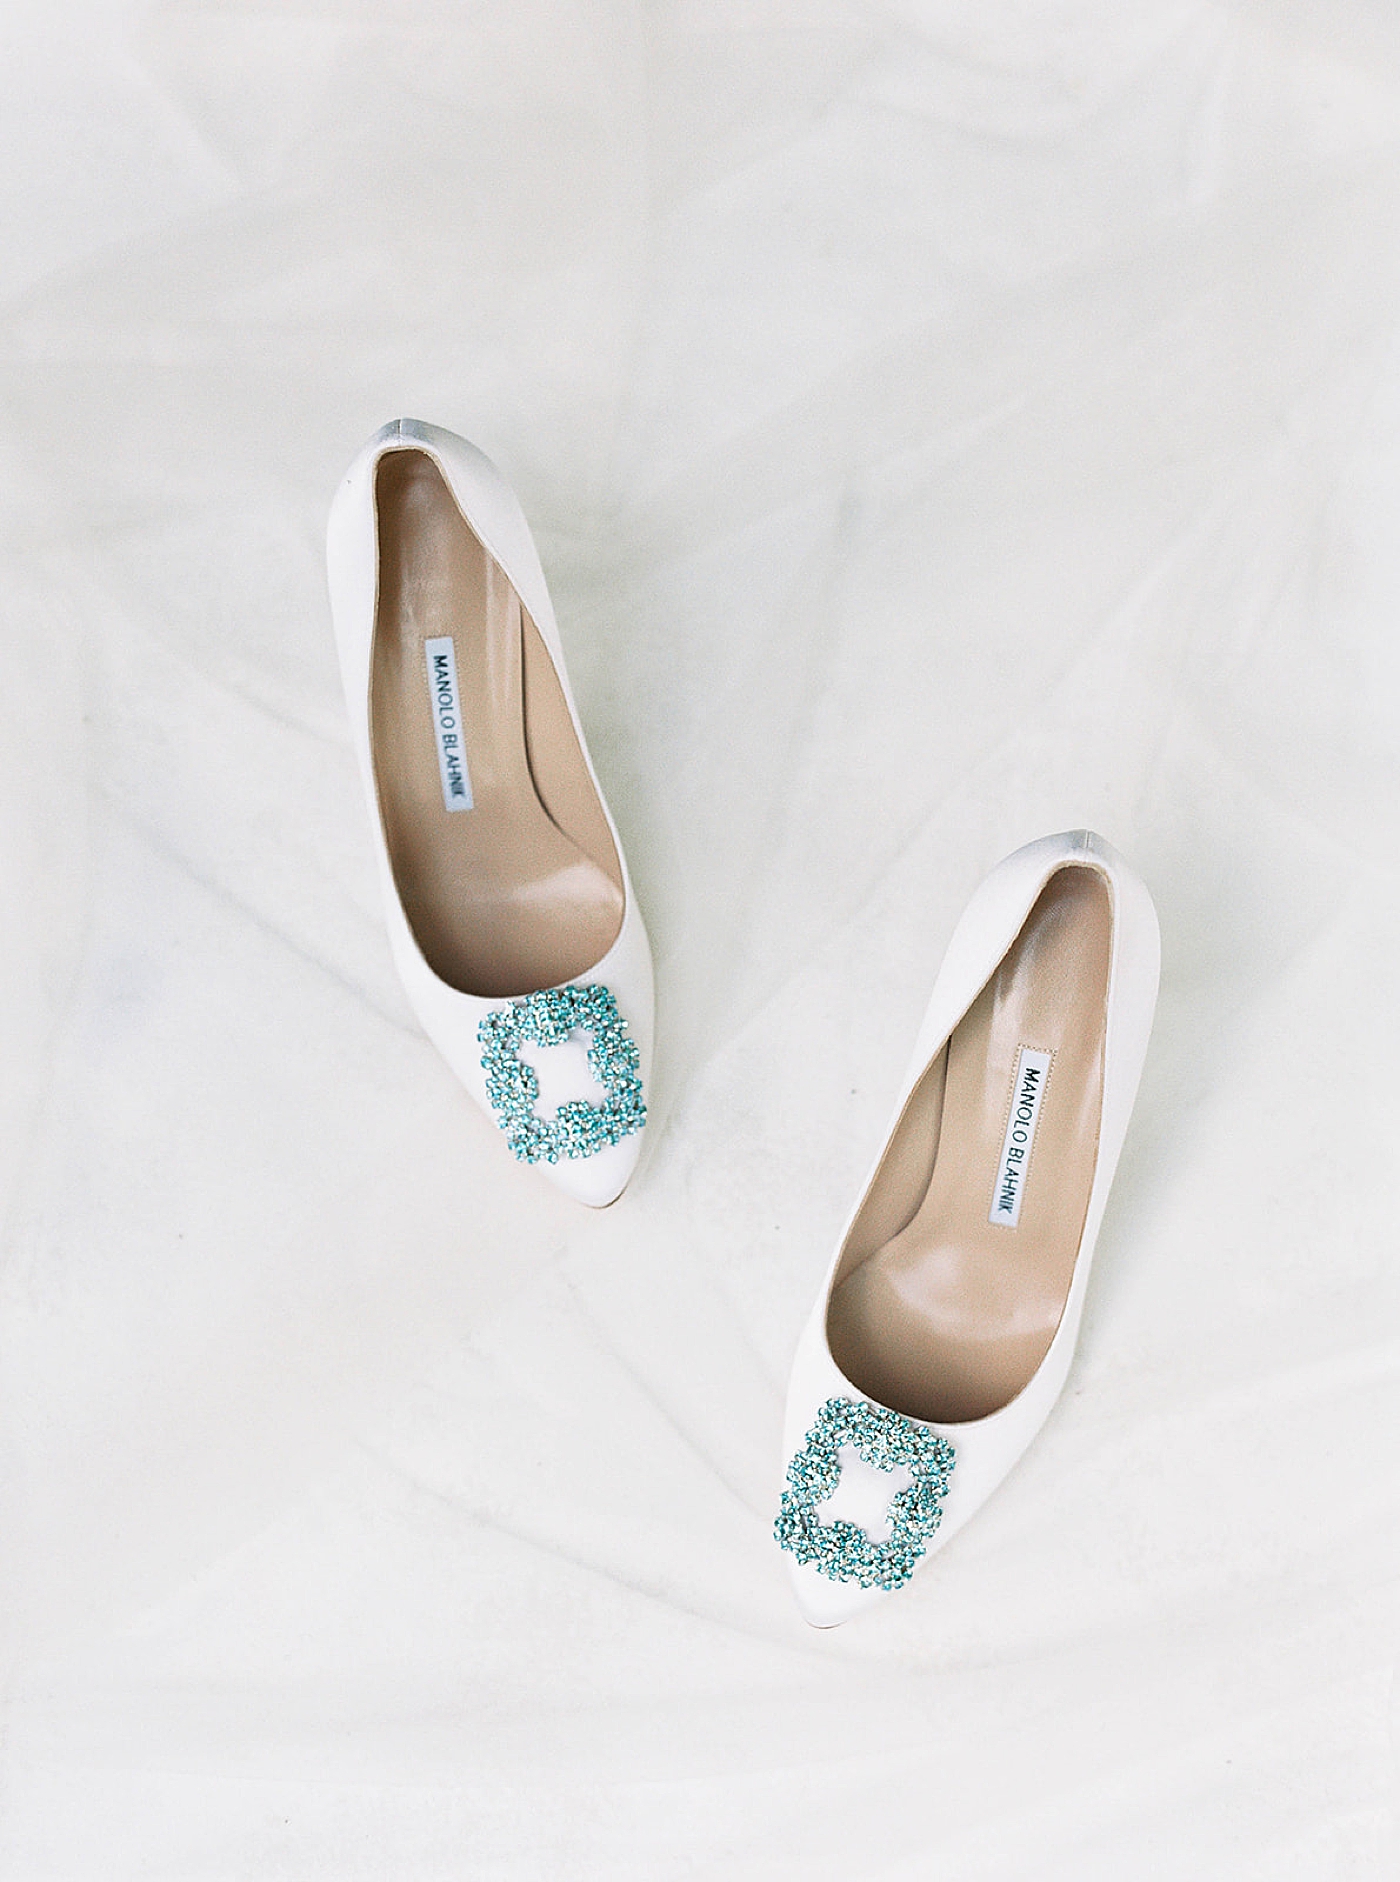 Classic Manolo Blahnik heels with blue details | Charleston Photography Workshop with Carters Event Co